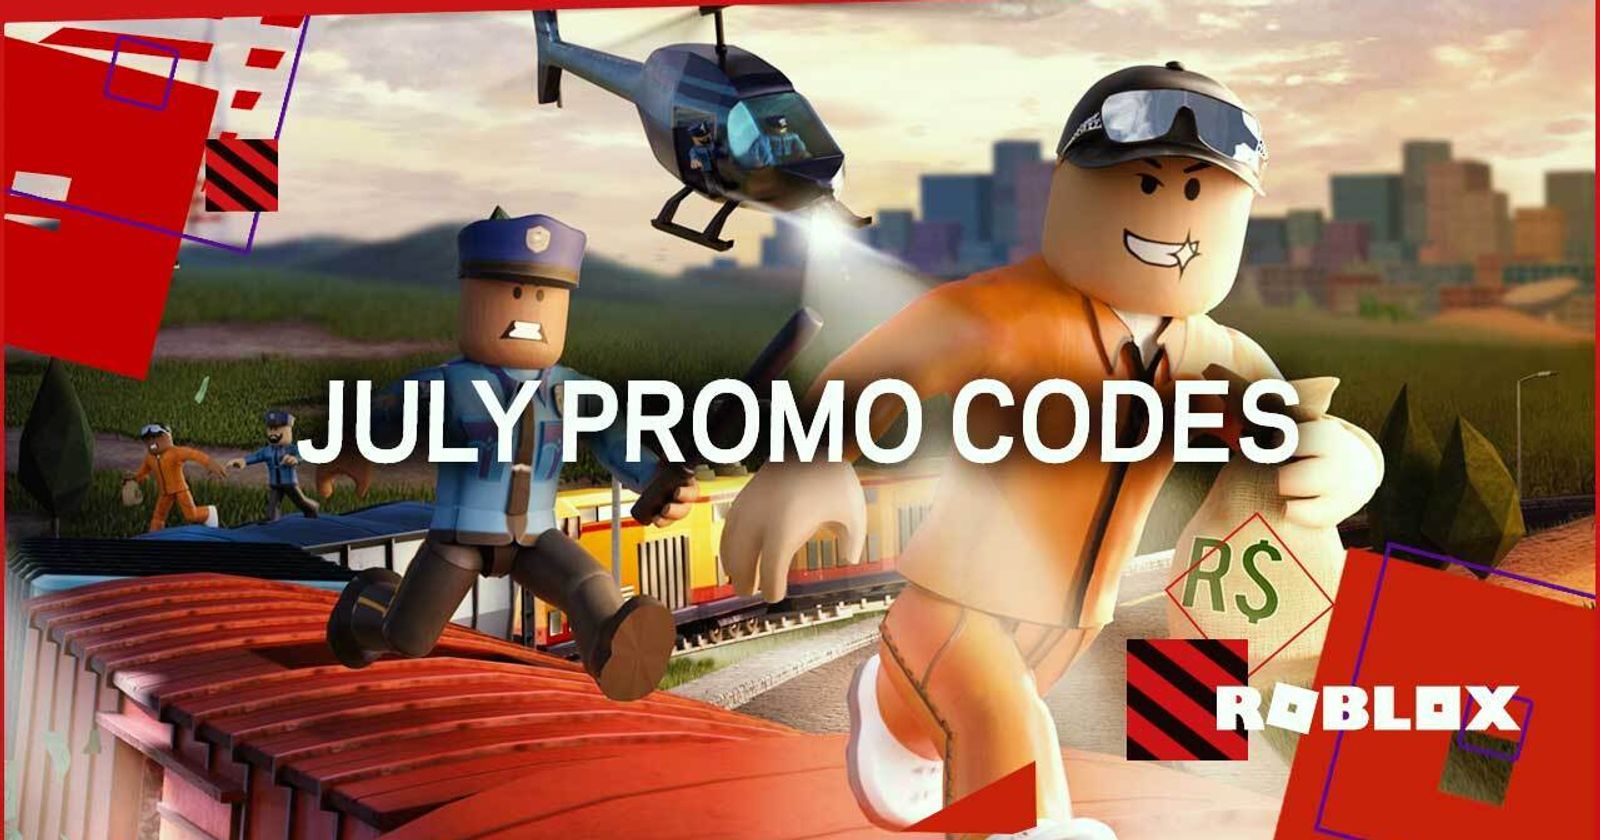 Roblox promotional codes  Roblox gifts, Coding, Roblox